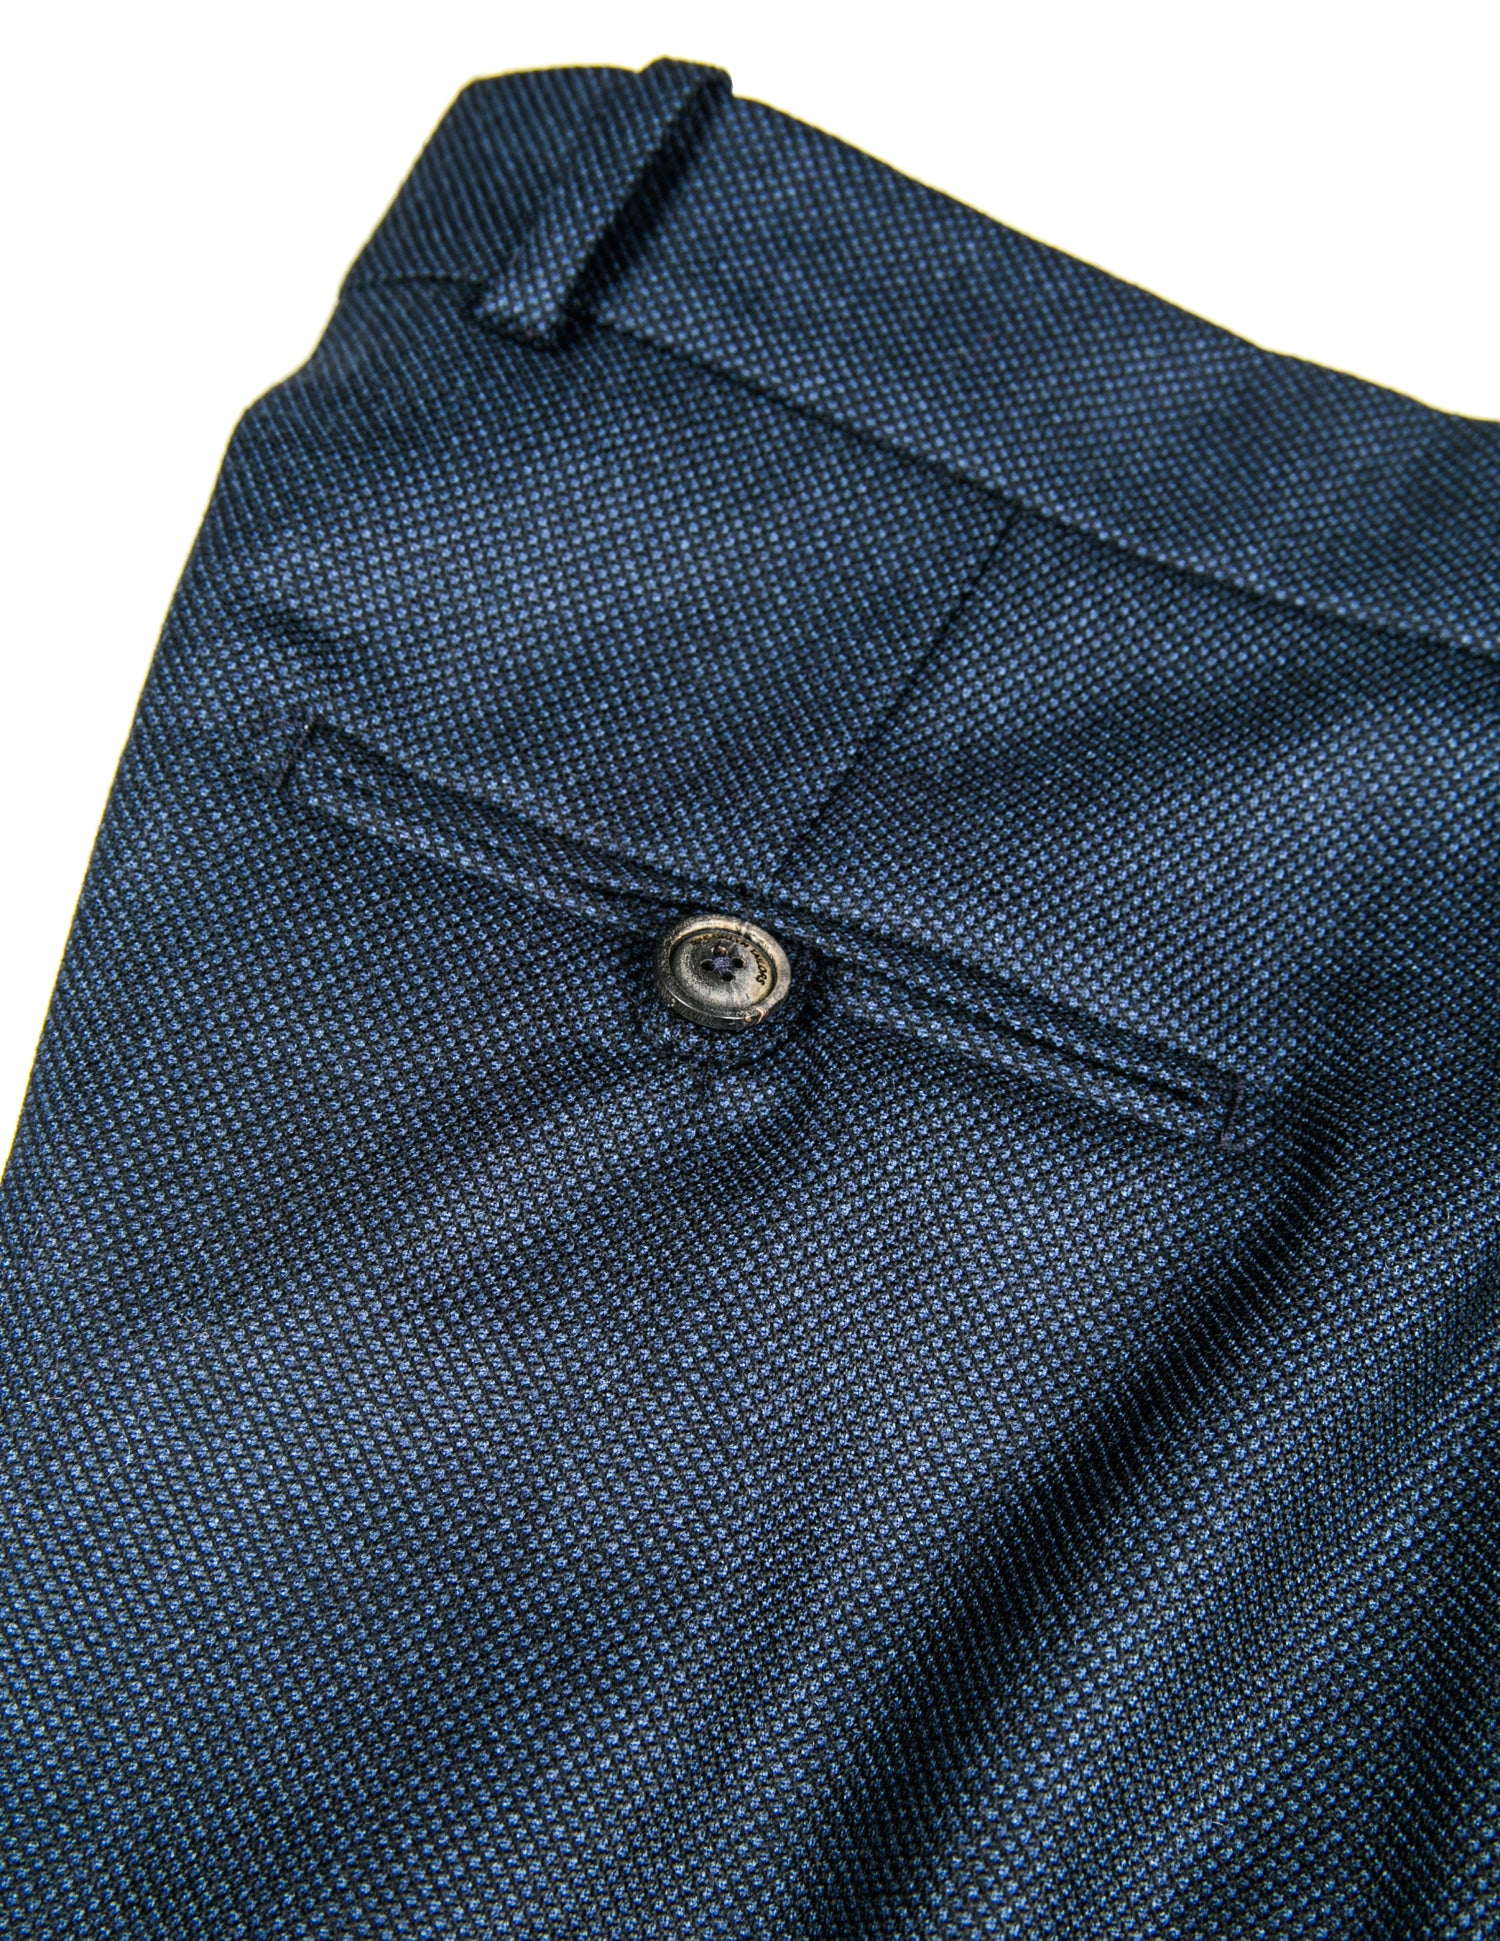 Detail of BKT50 Tailored Trouser in Birdseye Weave - Navy showing back pocket and fabric pattern